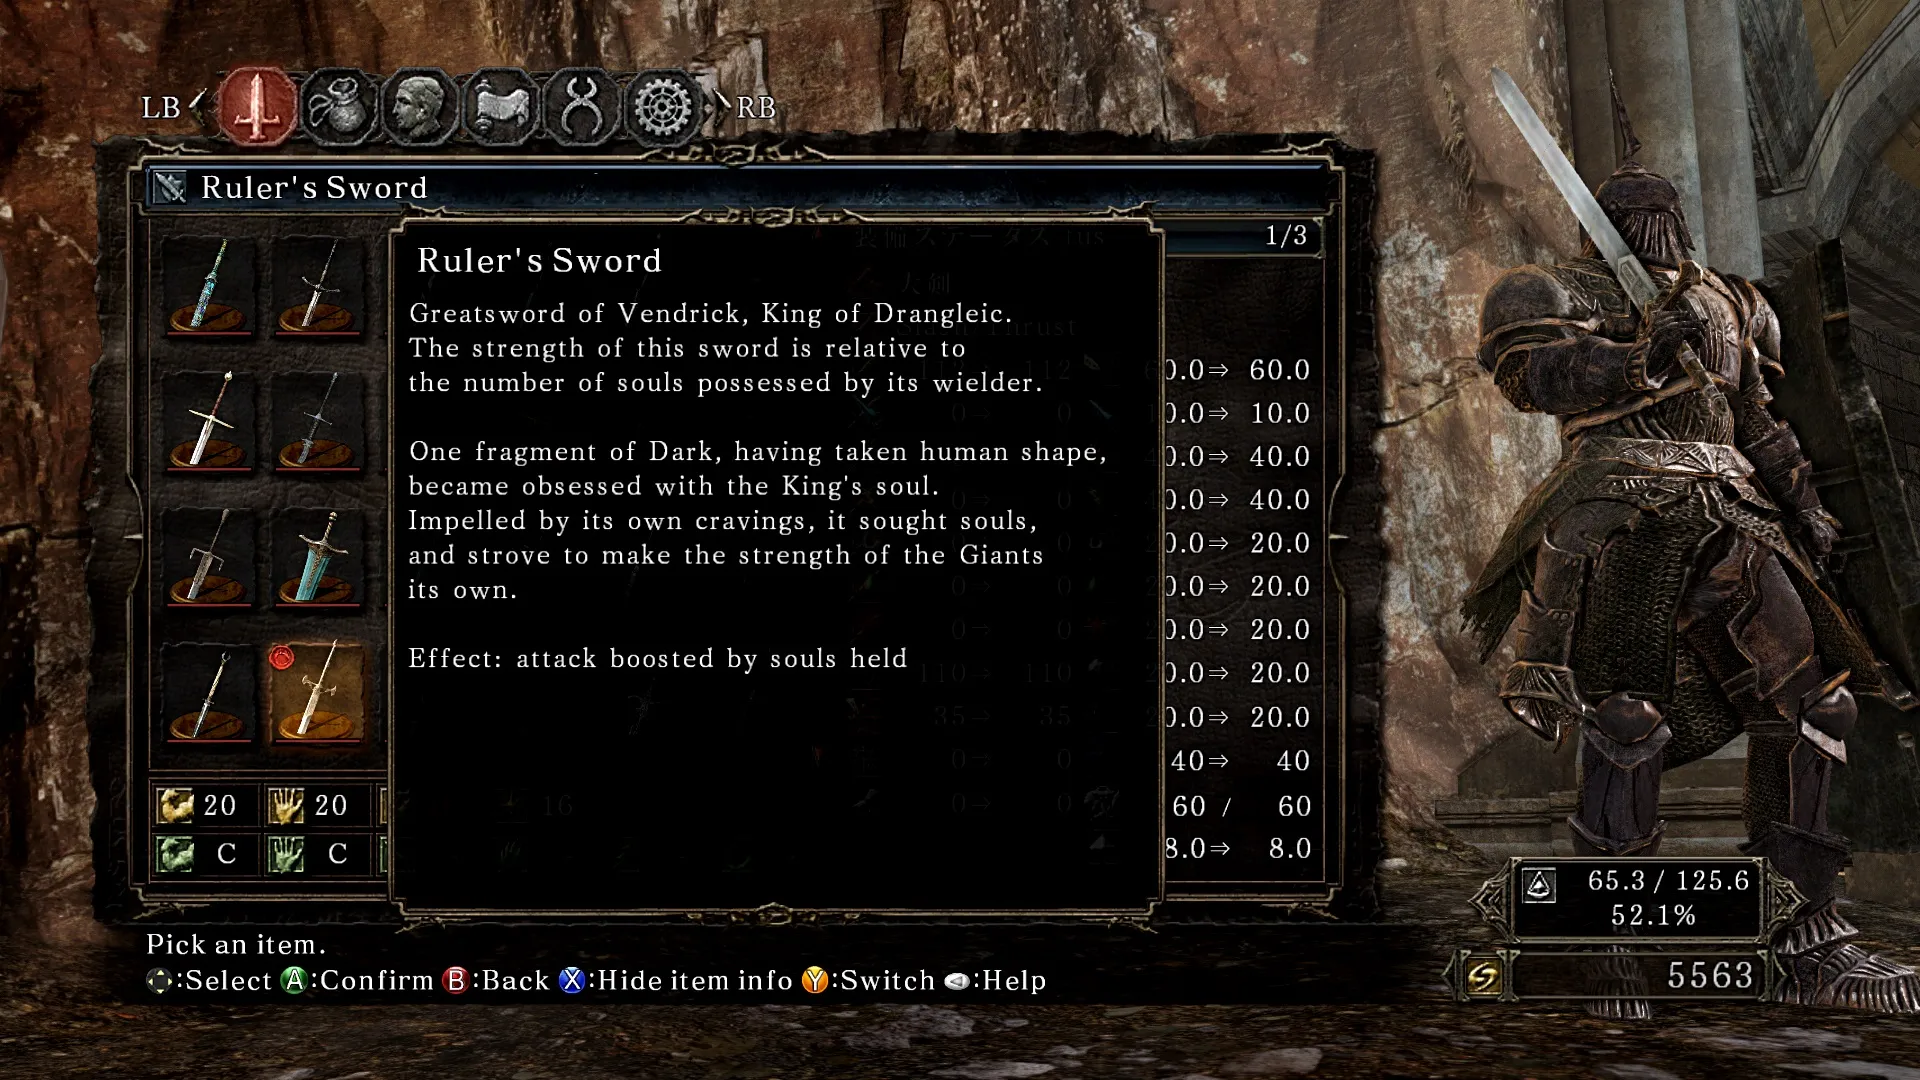 DARK SOULS II: Scholar of the First Sin System Requirements - Can I Run It?  - PCGameBenchmark